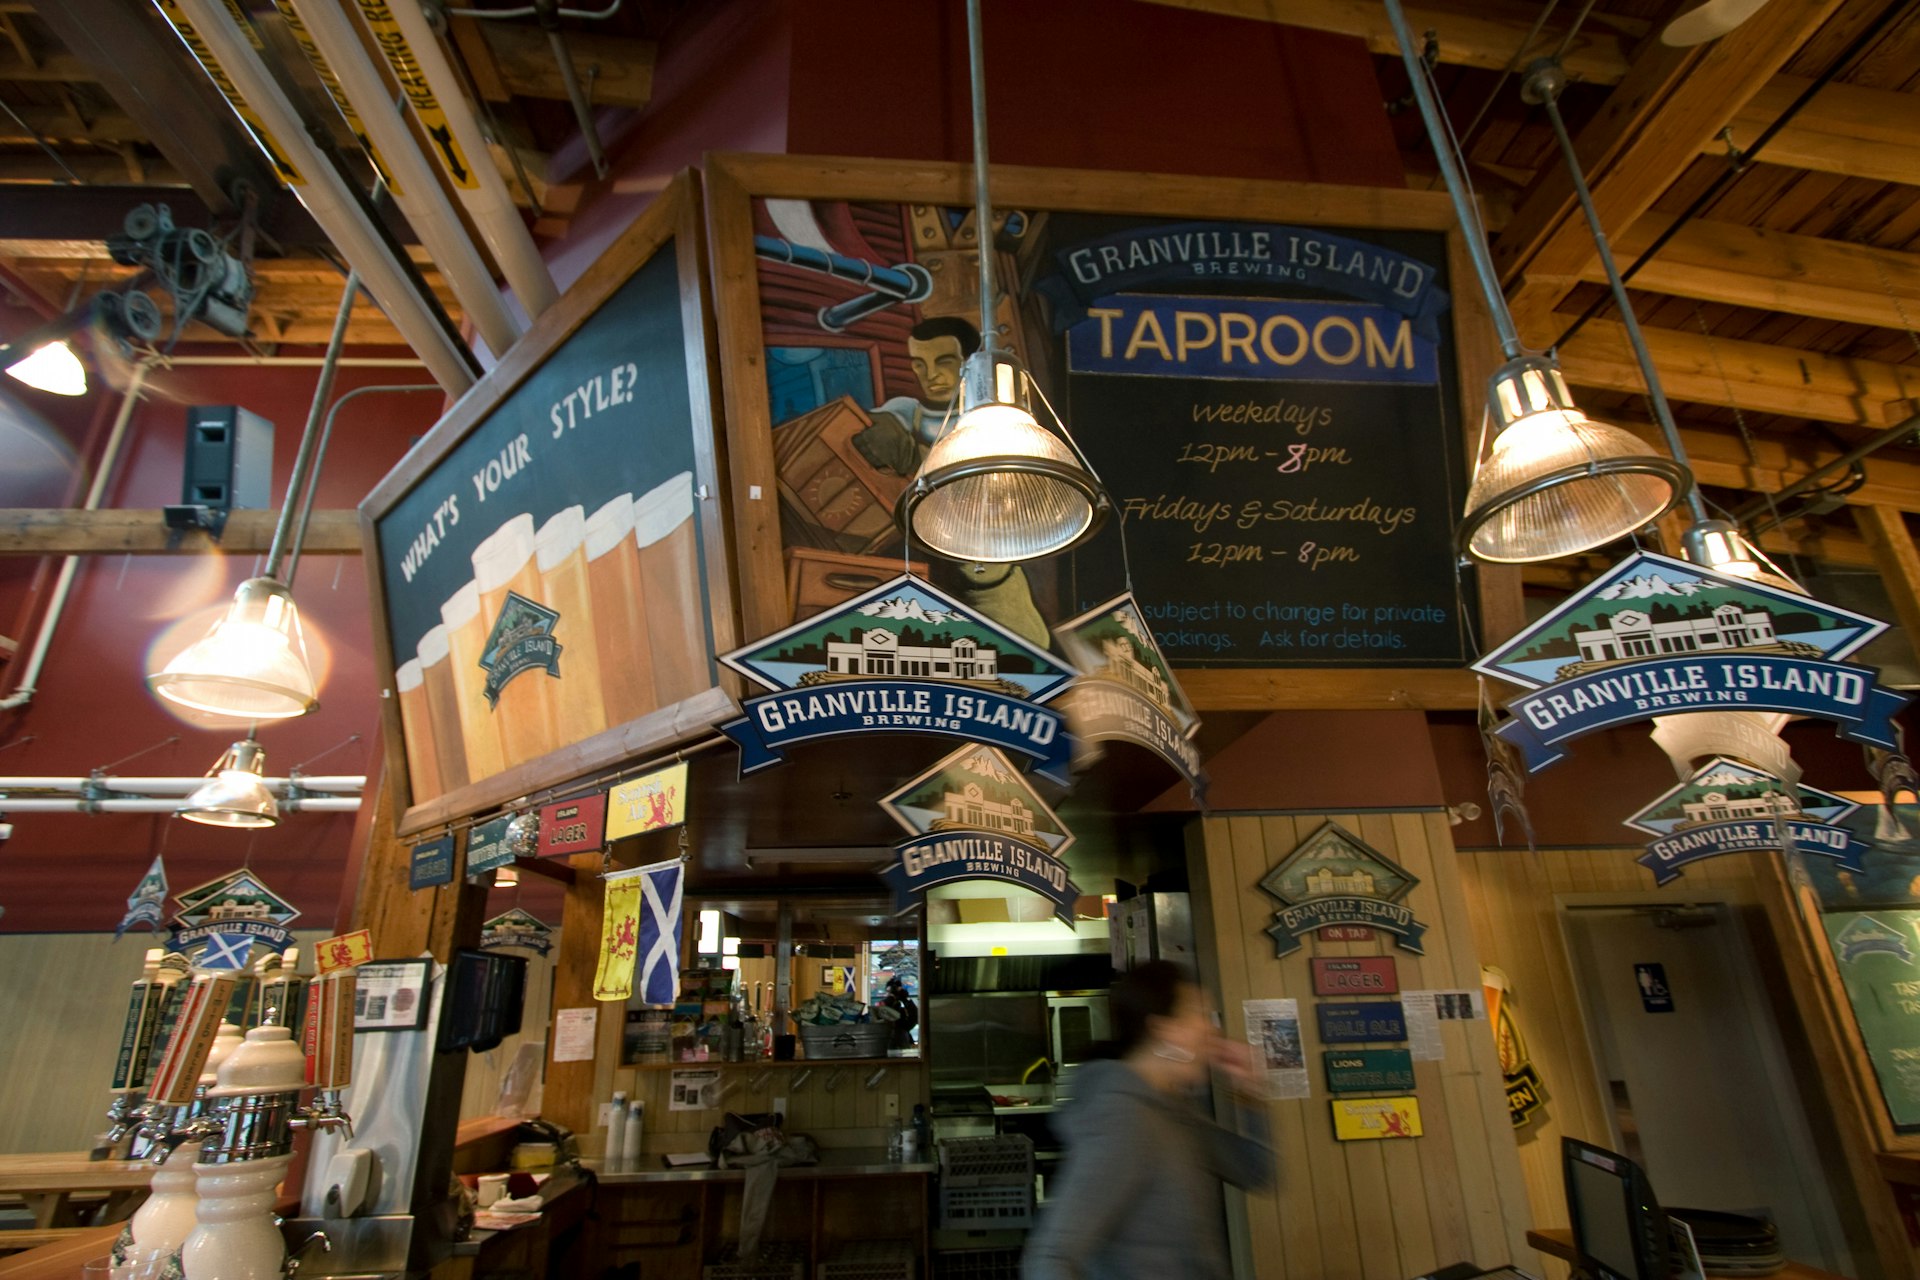 The selection at Granville Island Brewing covers everything from hop-heavy IPAs to small-batch barleywines. Image by Lawrence Worcester / Lonely Planet Images / Getty